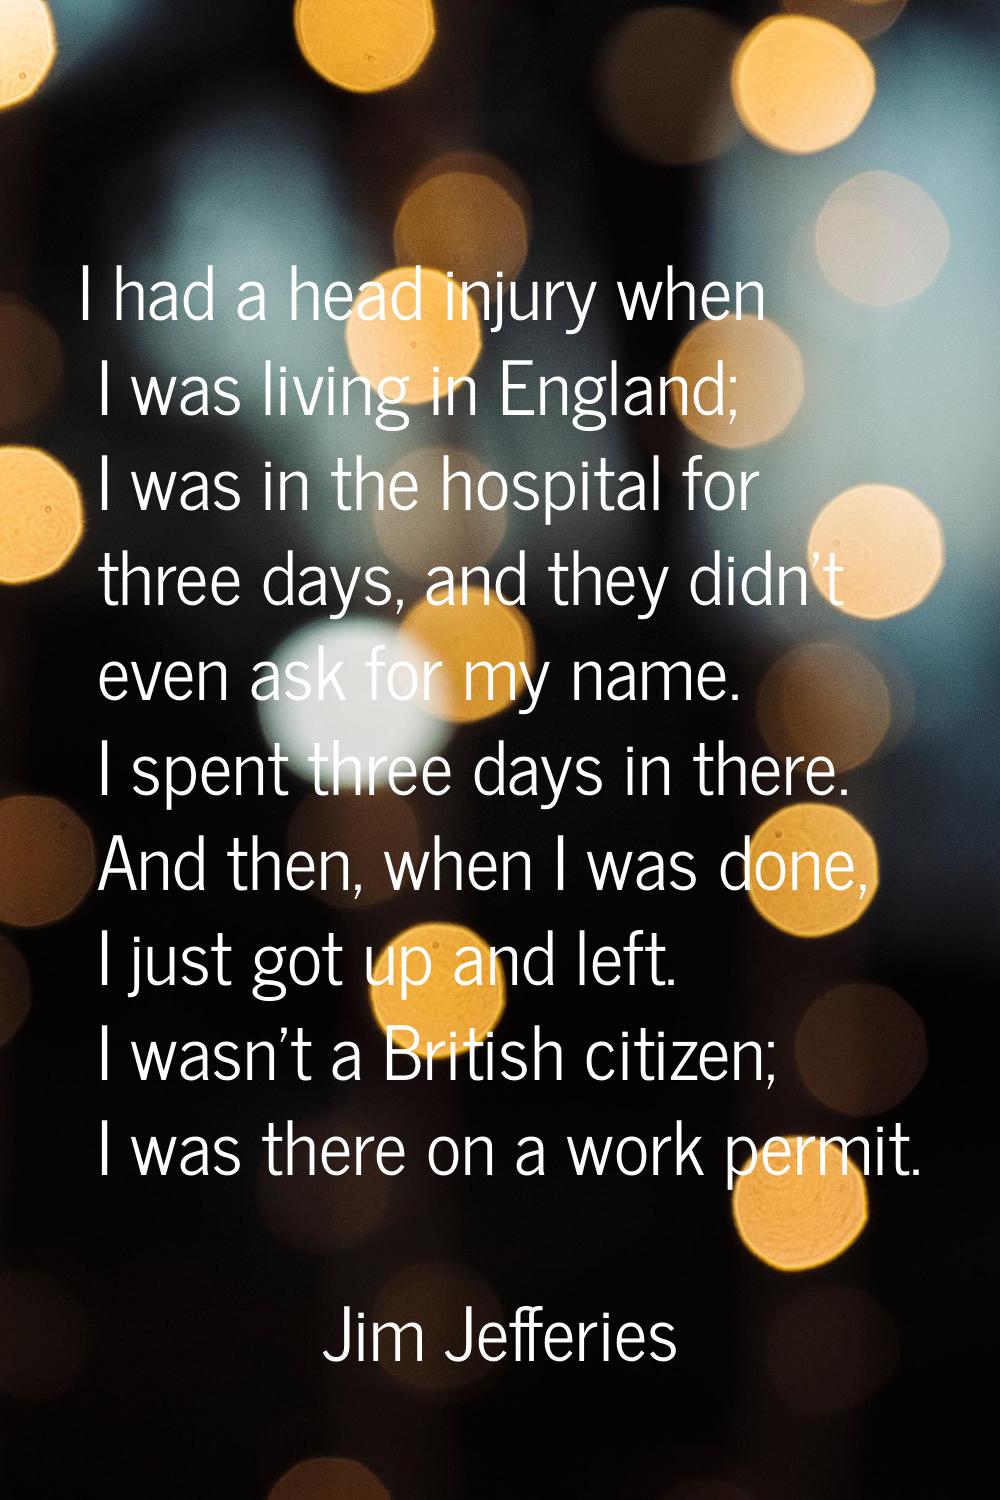 I had a head injury when I was living in England; I was in the hospital for three days, and they di